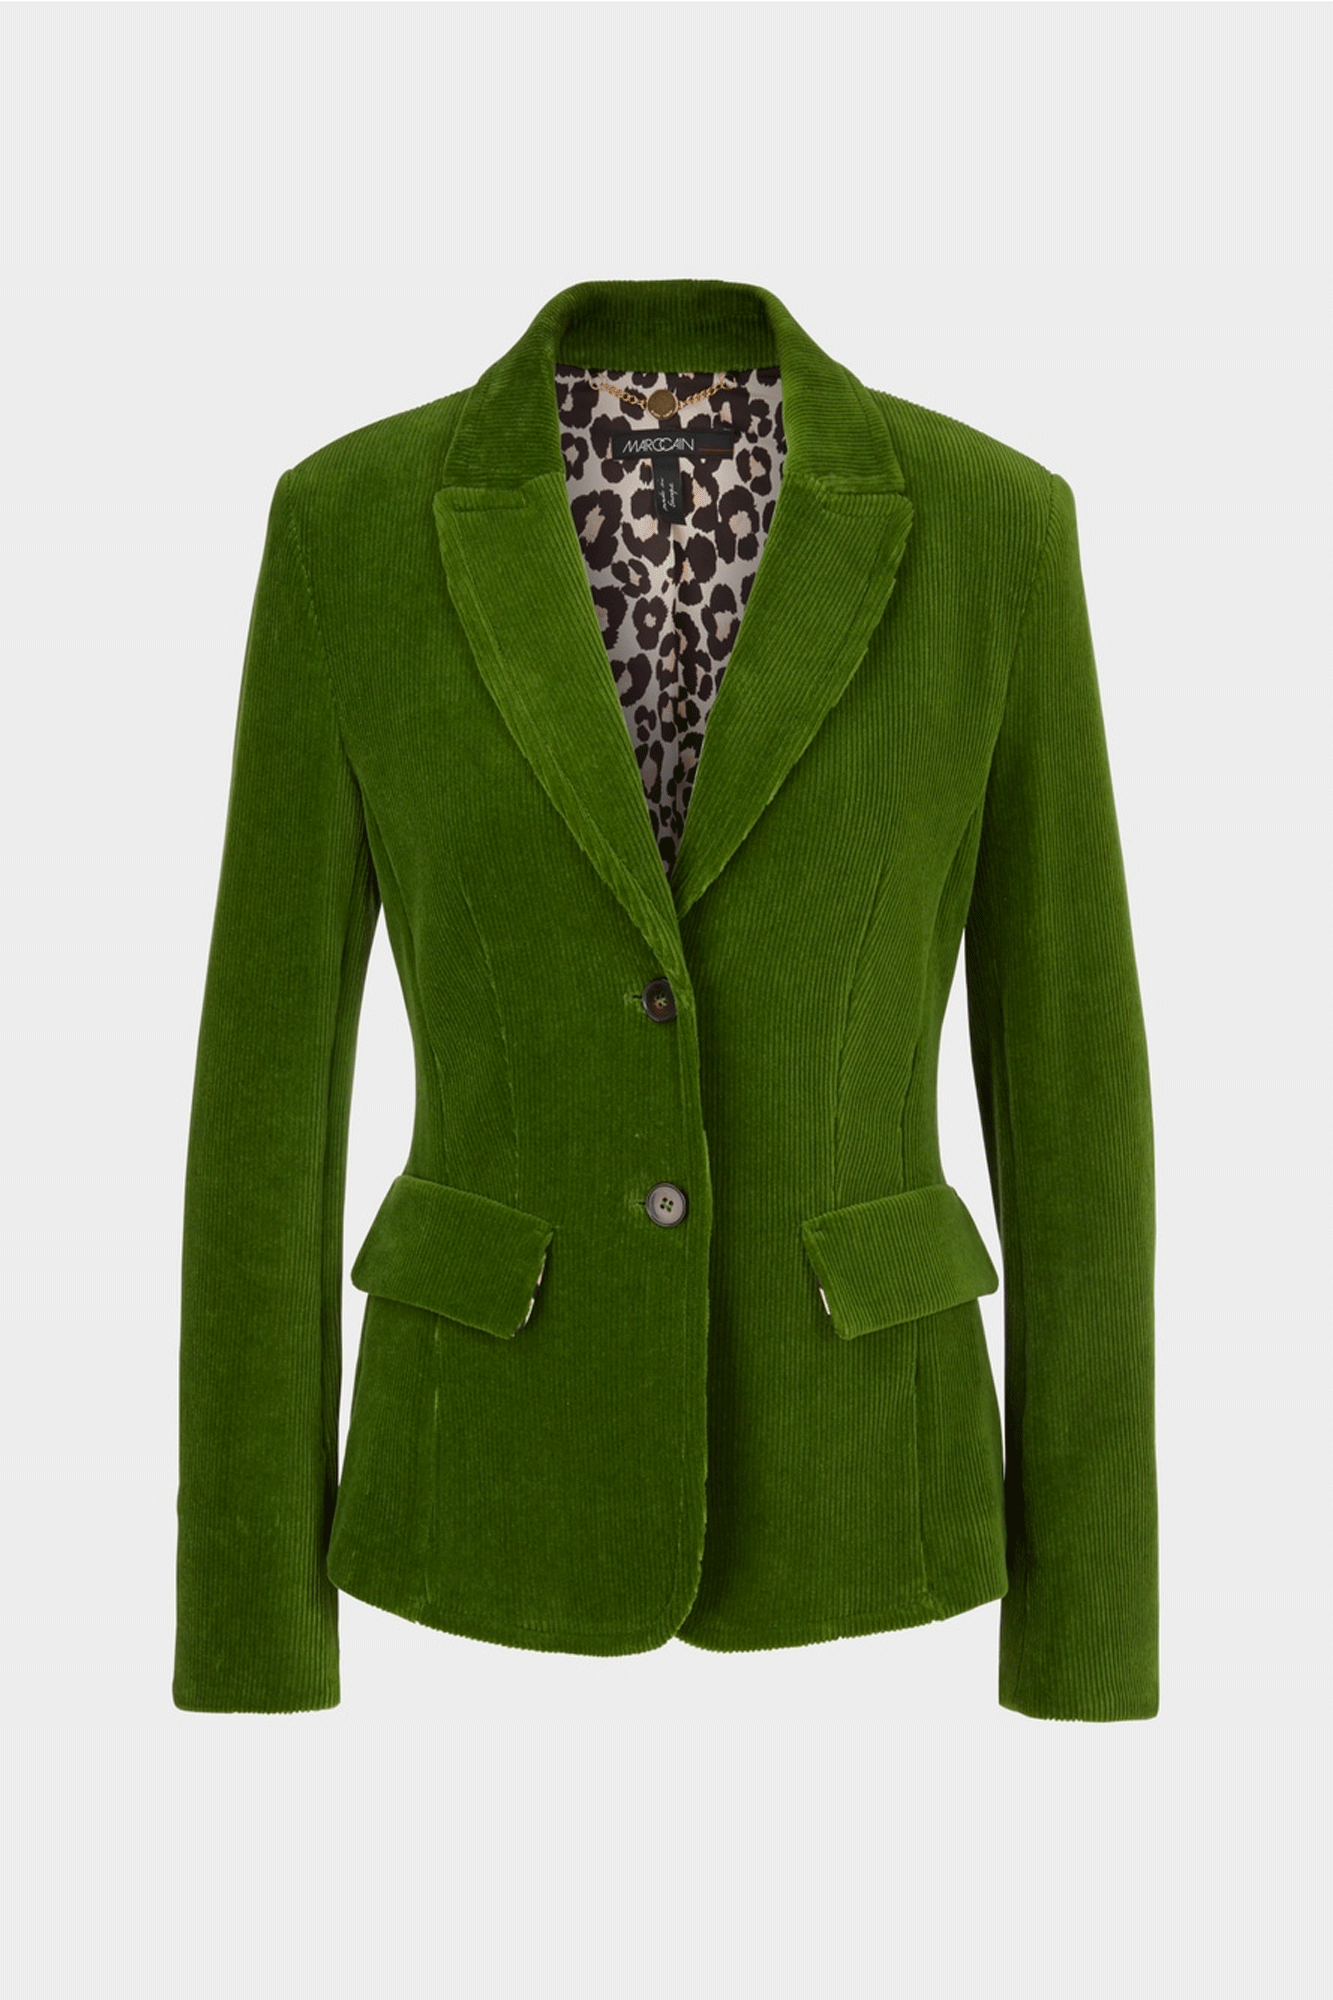 This Night Train Blazer from Marc Cain is designed to be comfortable and fashionable. Classic elements like the single-breasted button closure and decorative flap pockets combine with a corduroy material mix of 95% cotton and 5% elastane for extra stretch. The lapel is rounded and designed with a rising shape, and the sleeve hems come with a buttoned slit for a refined touch.